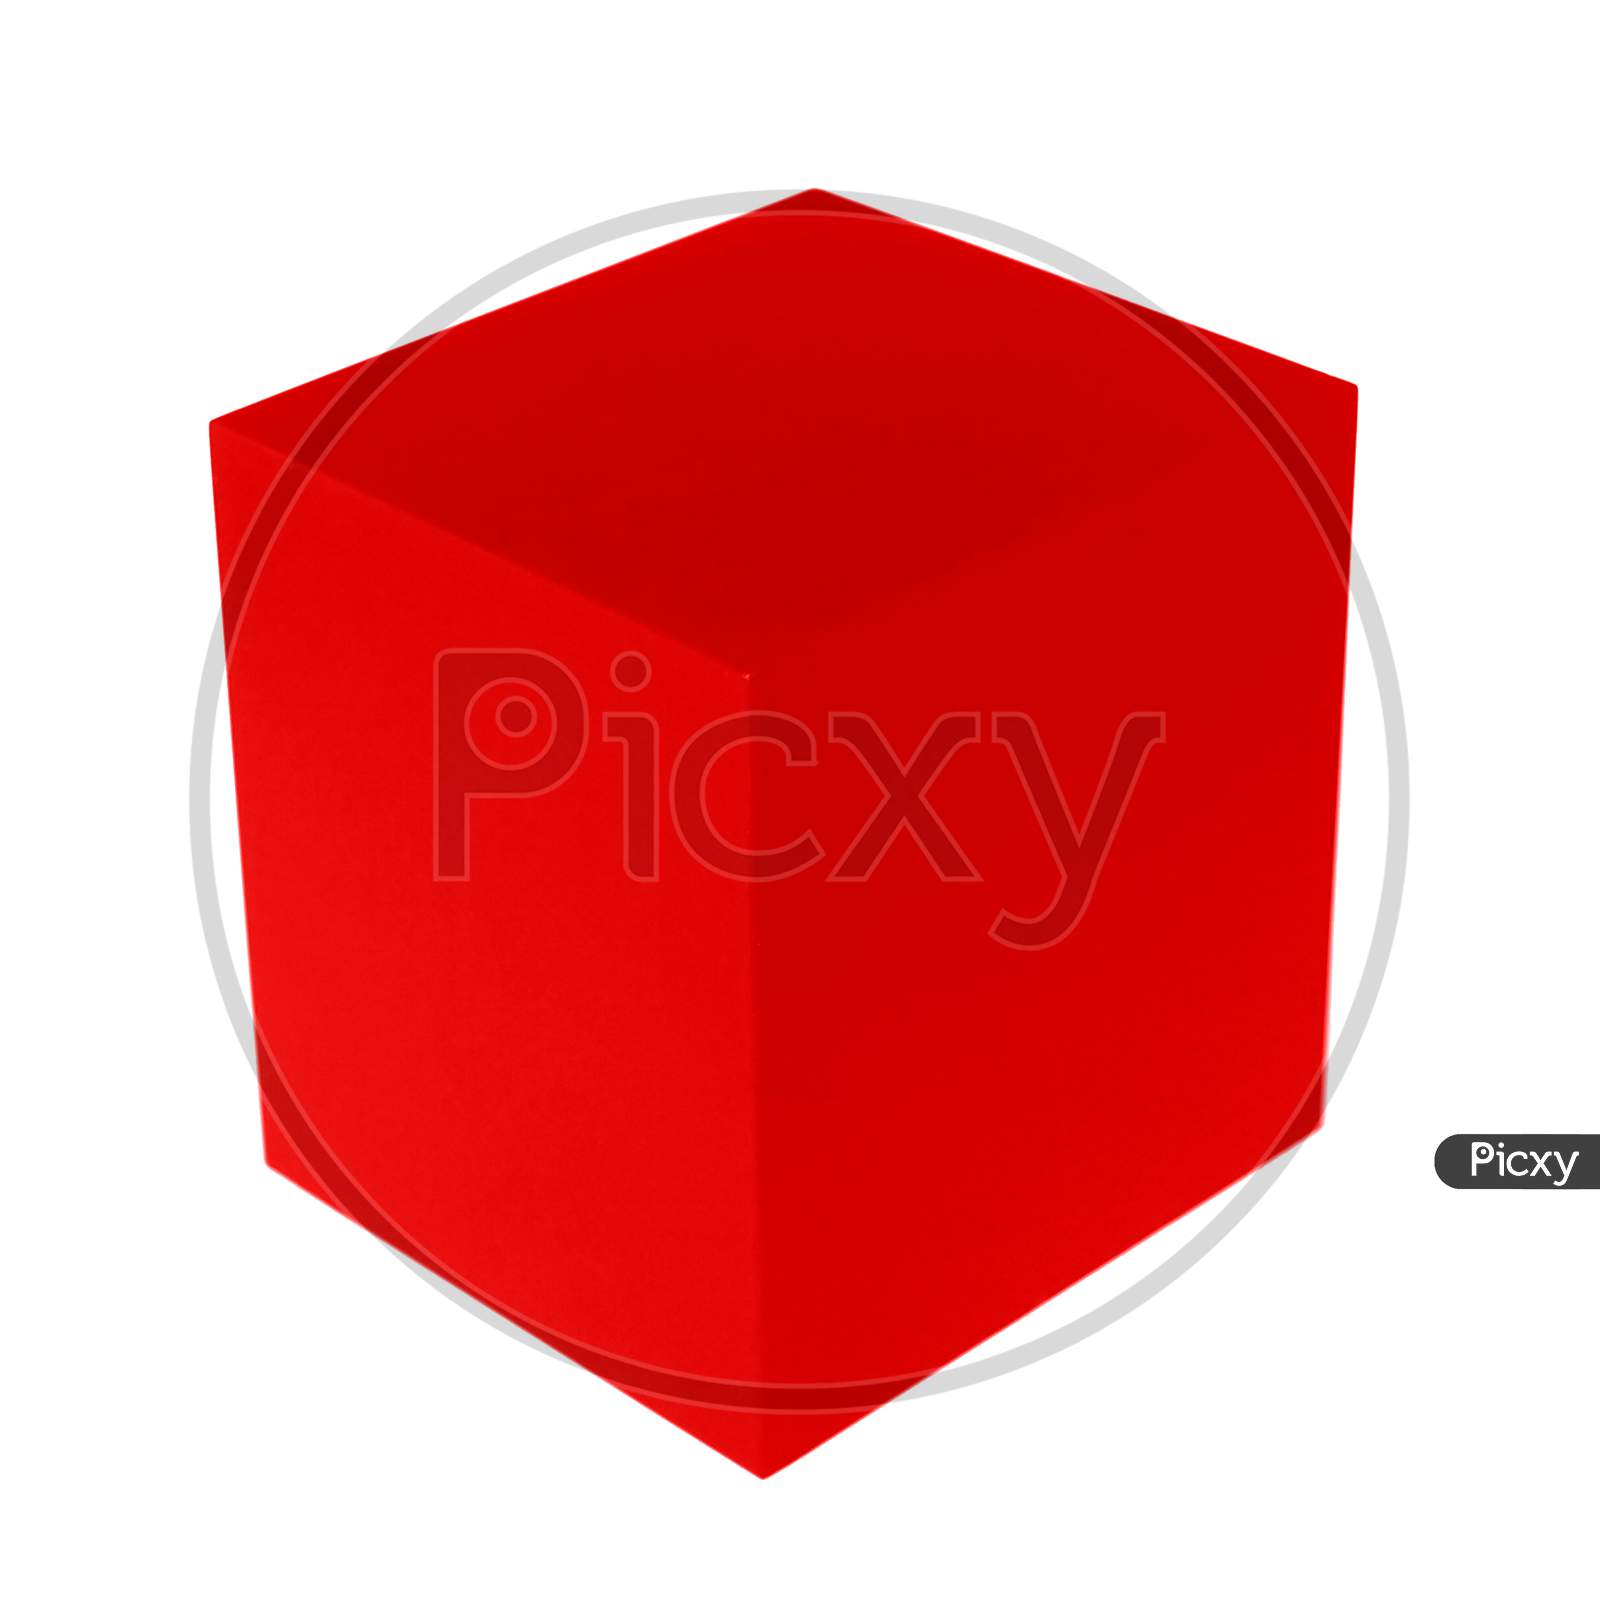 Red Cube Isolated Over White